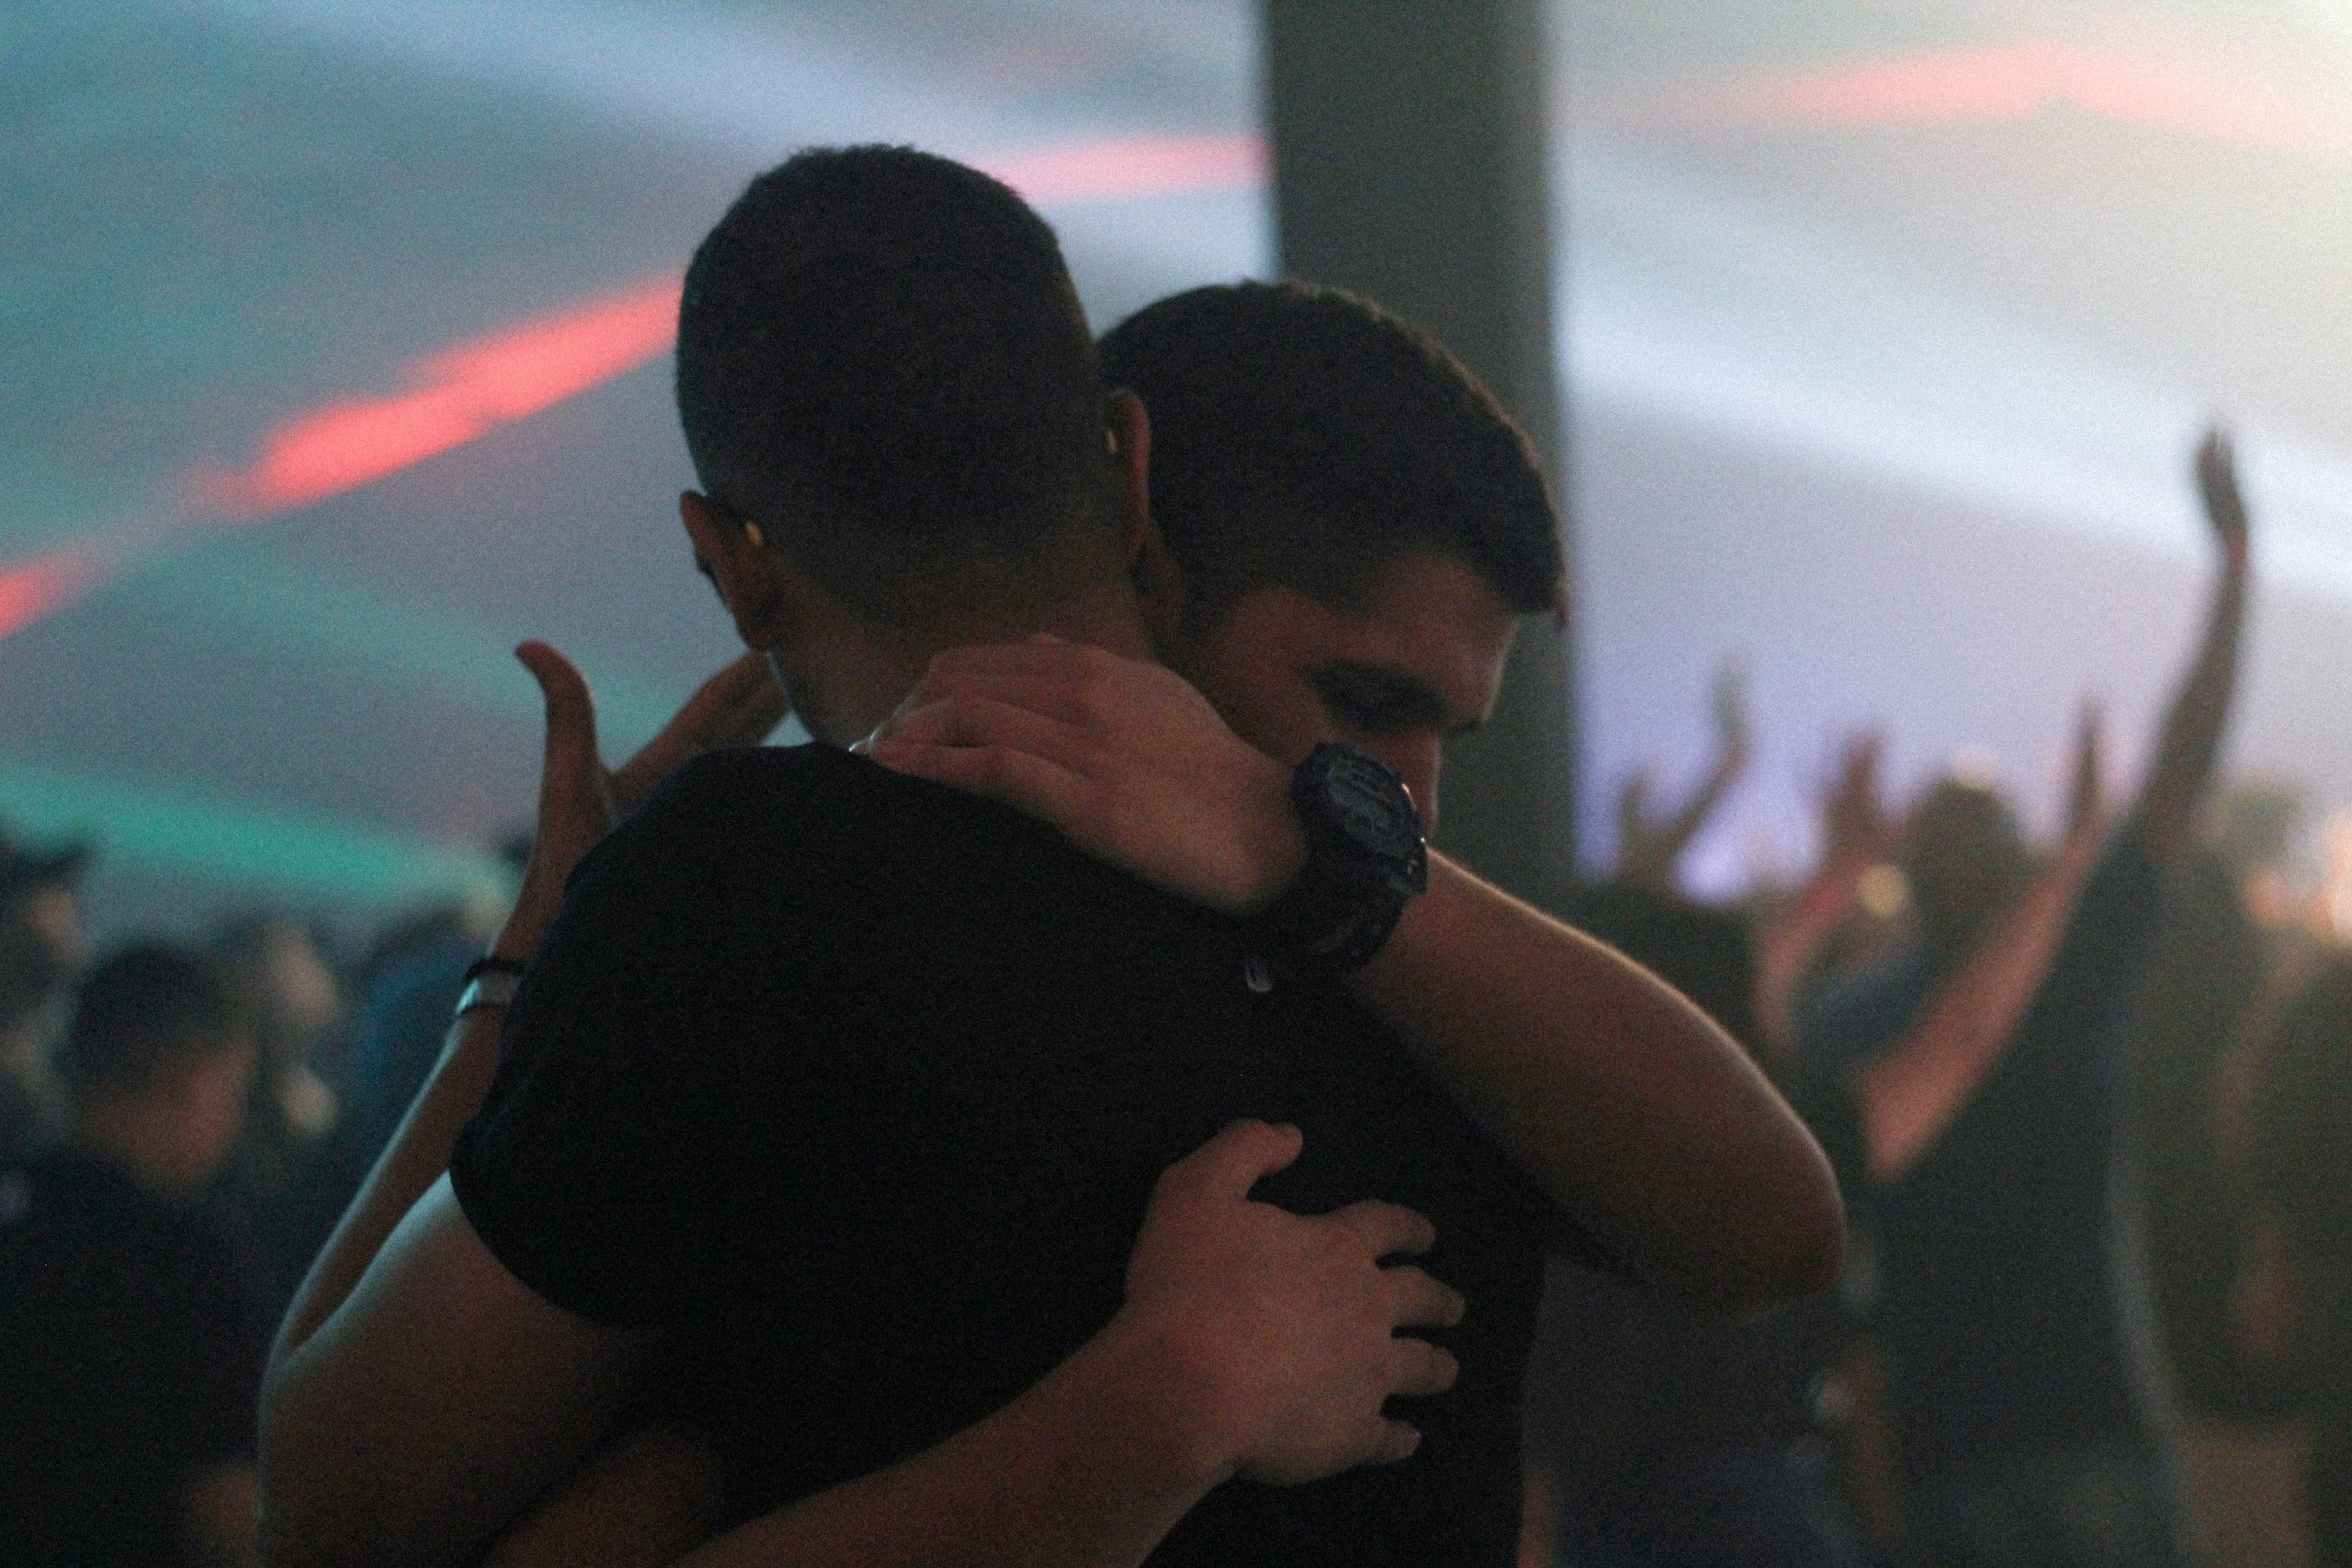 A picture of two people hugging at what looks like a disco. It is dark and lit with strobe lights.